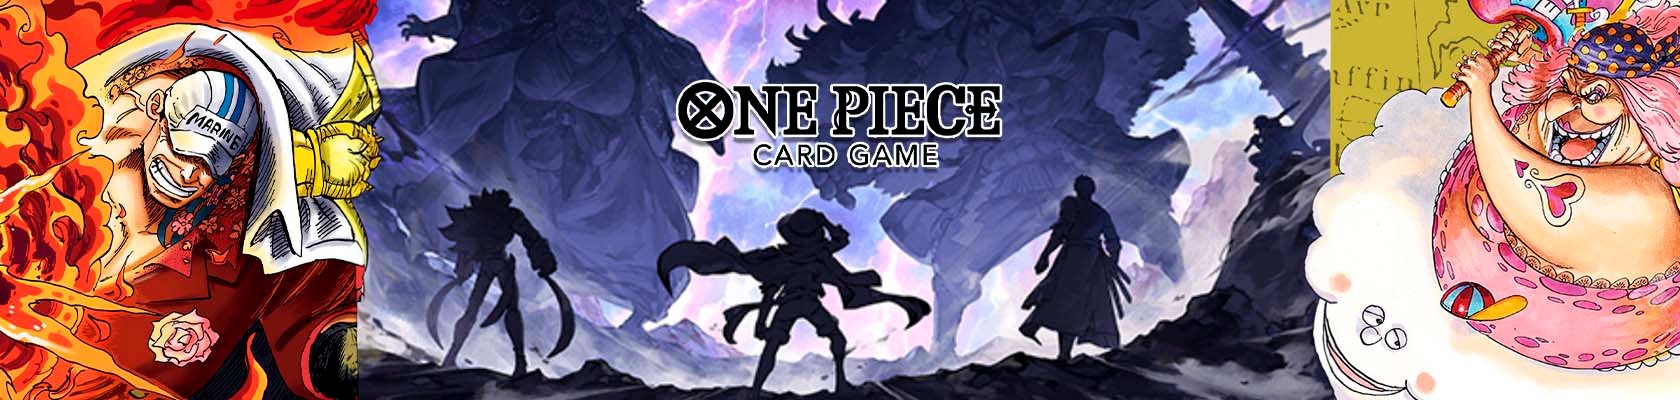 One Piece Card Game!